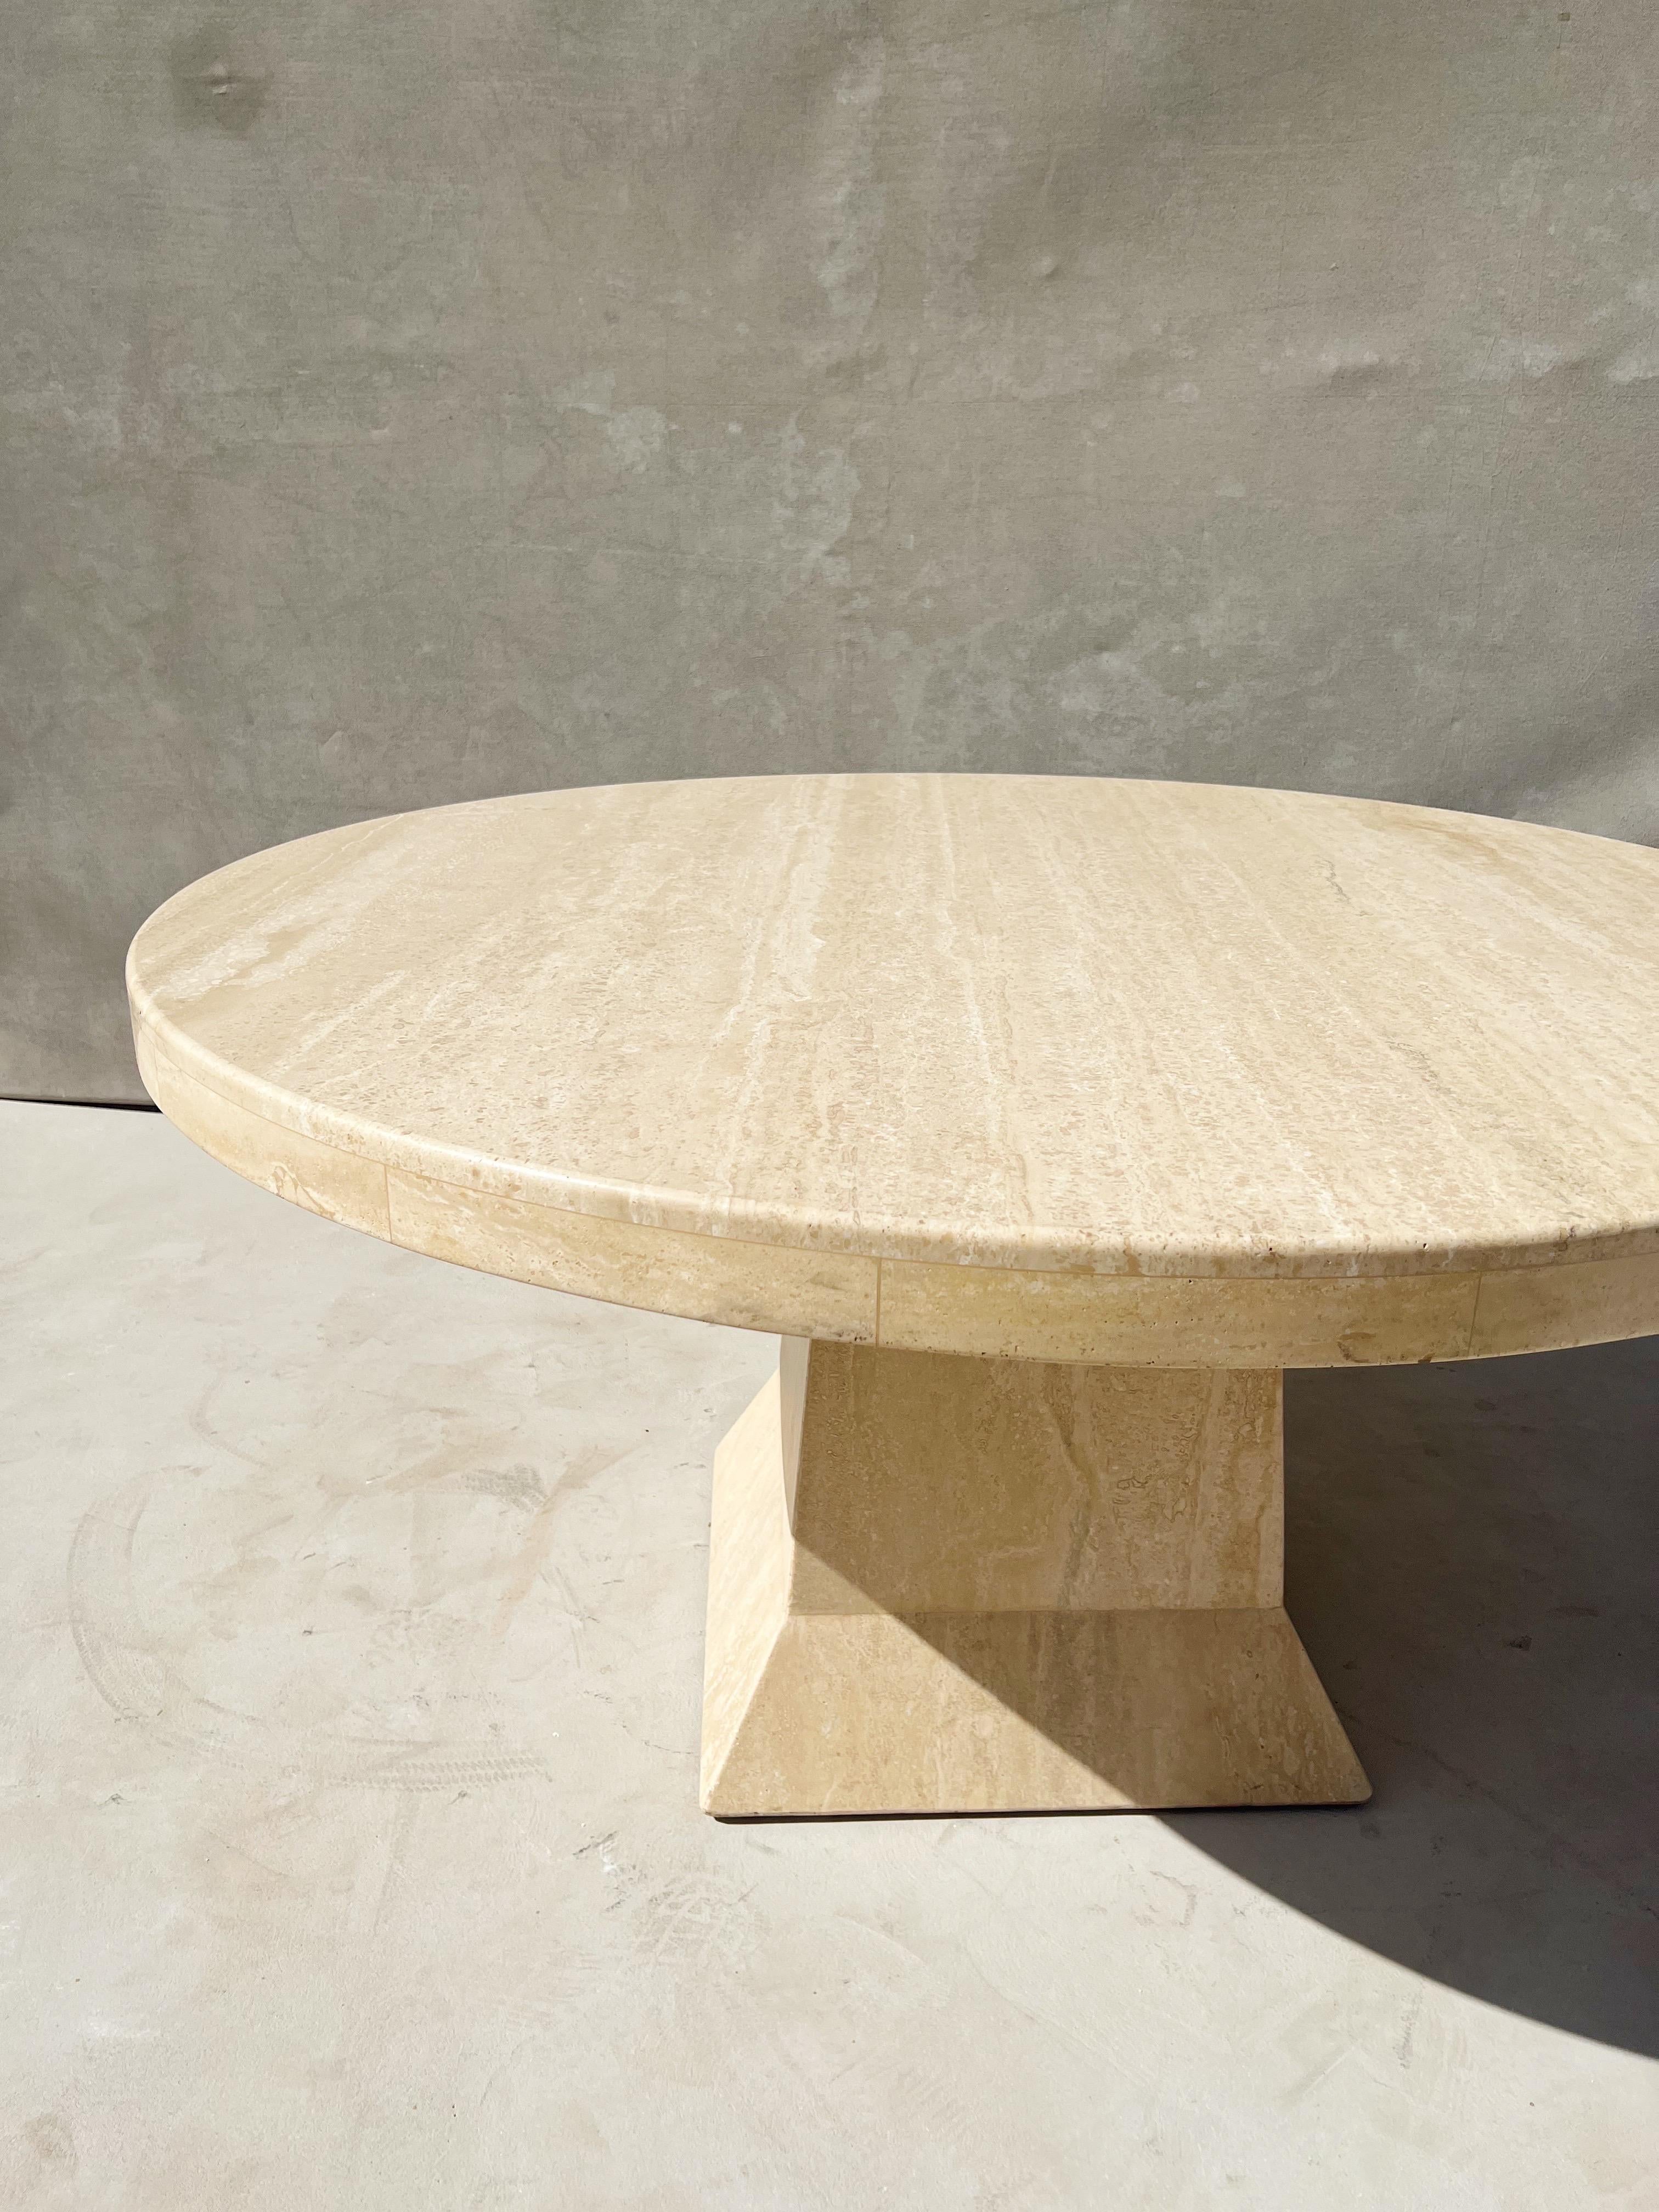 Vintage Italian Travertine Round Dining Table with Sculptural Base For Sale 2